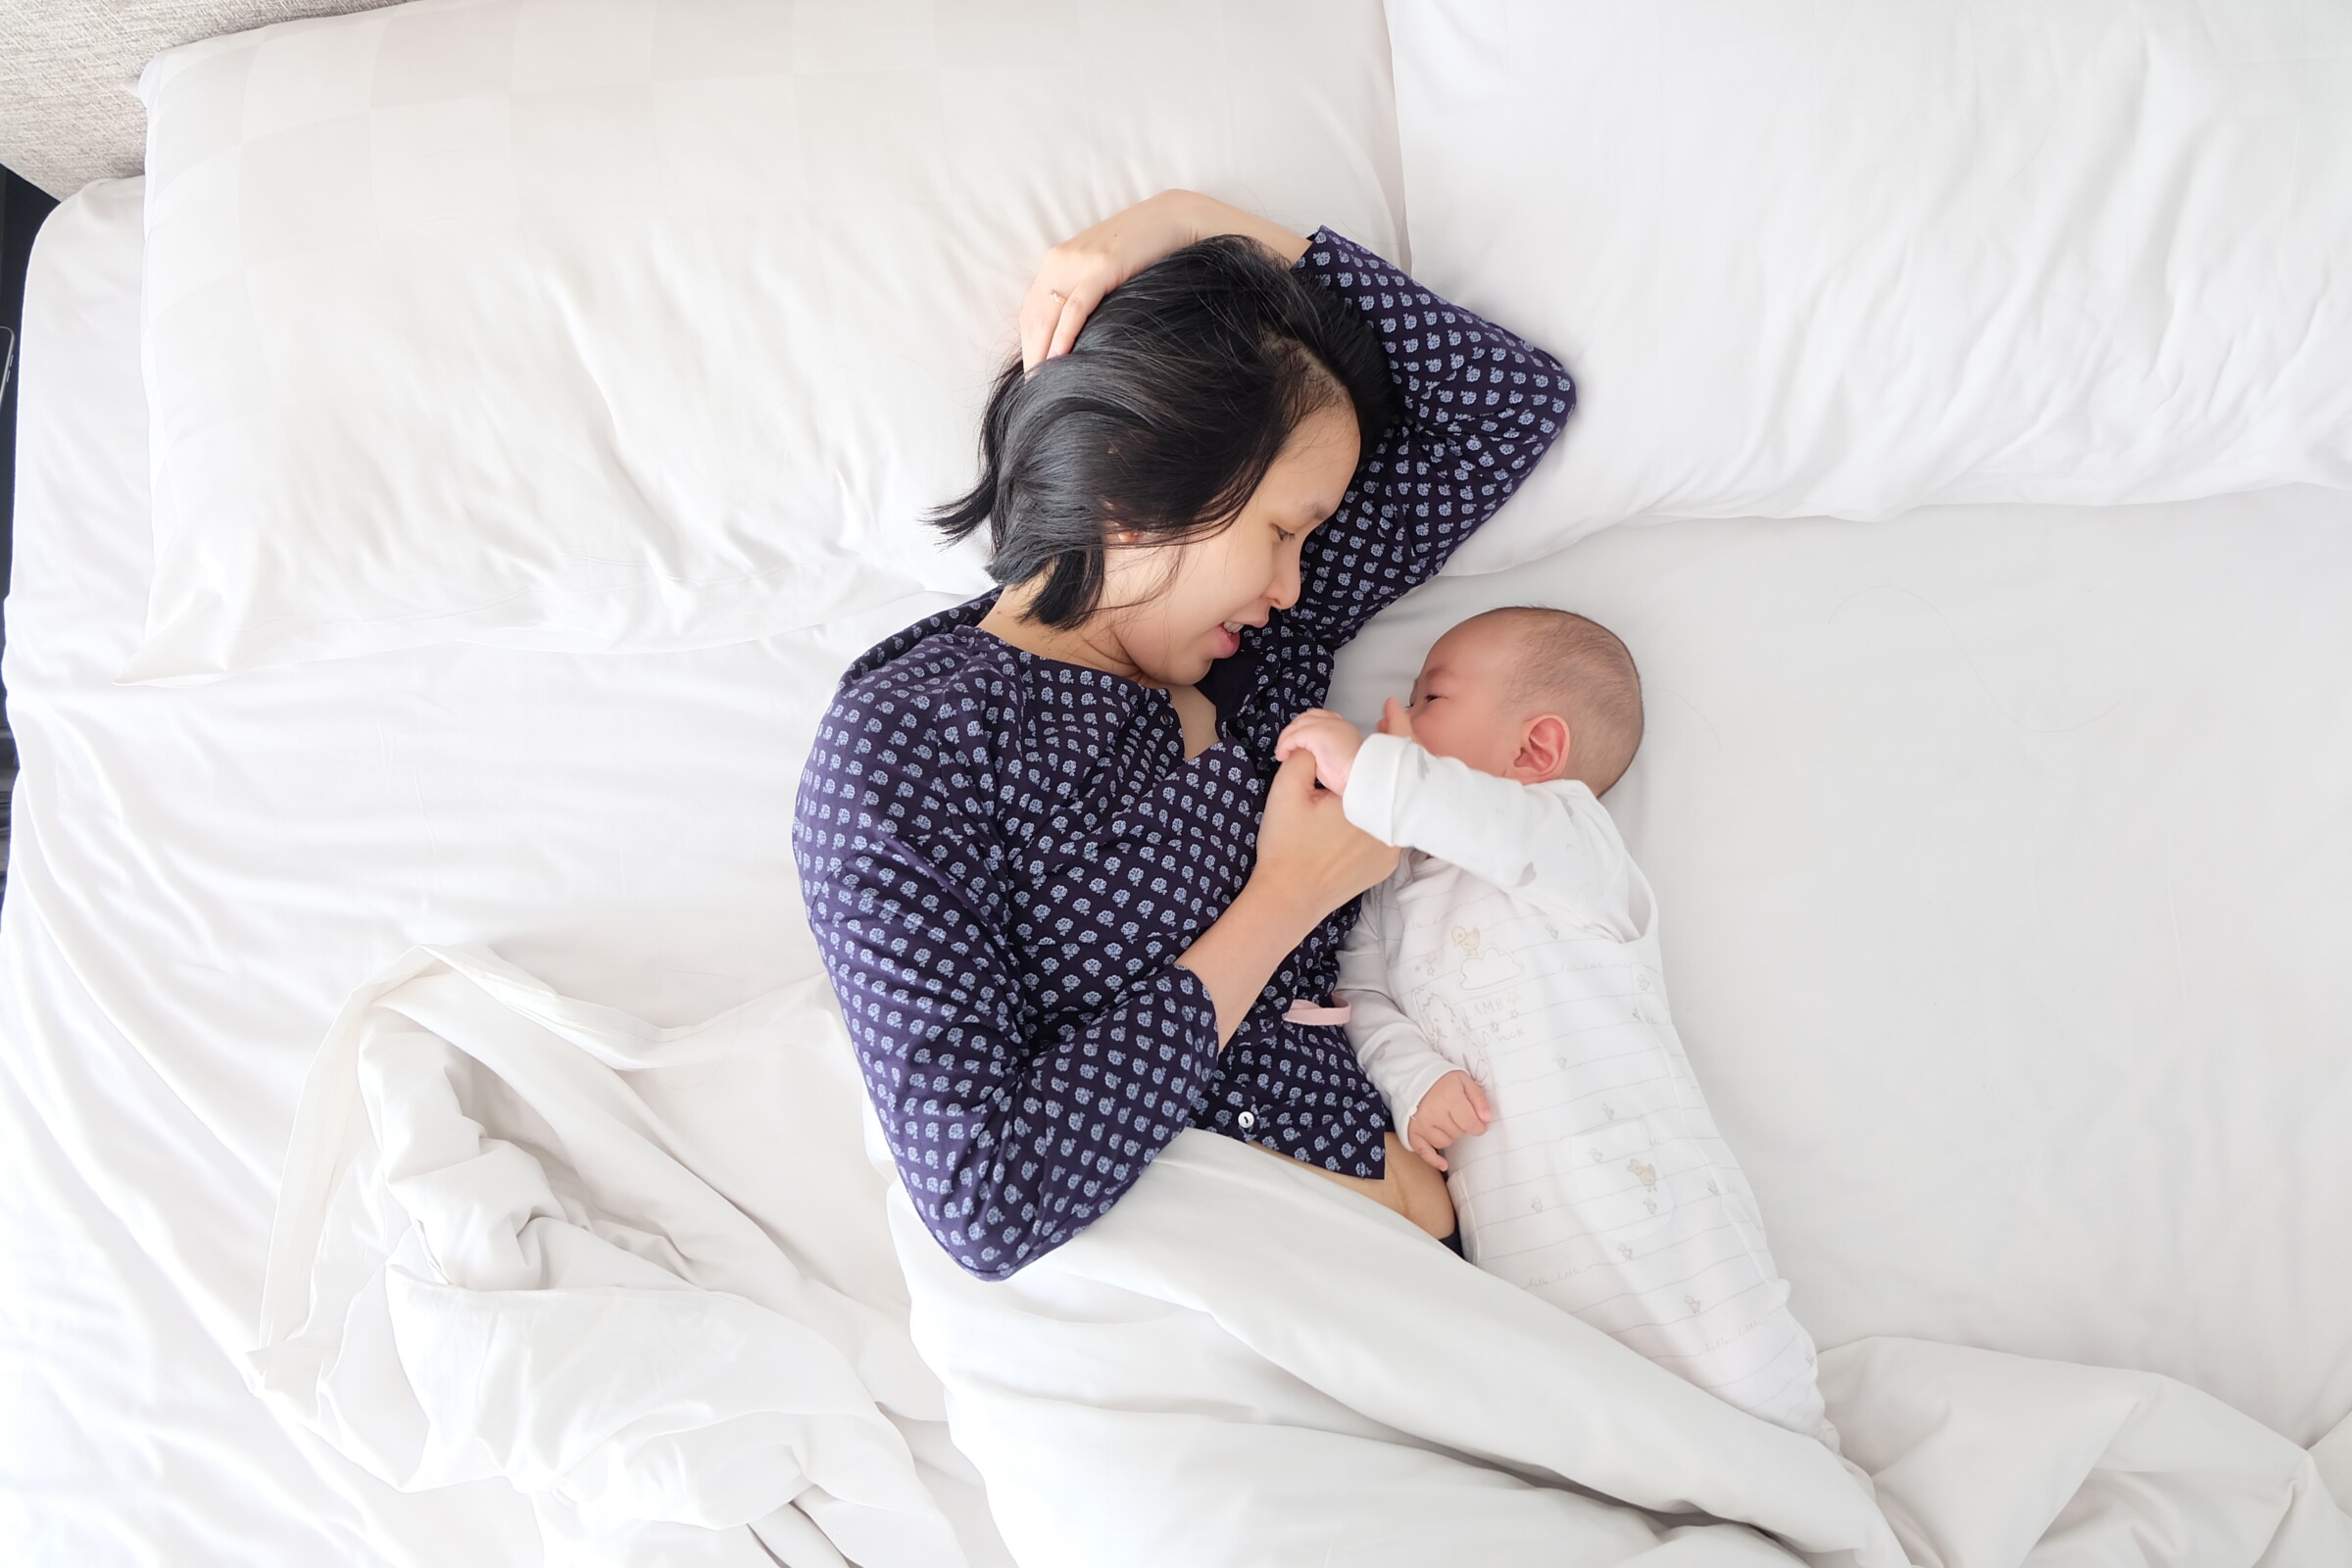 A Quick Birth Control Guide for Breastfeeding Moms